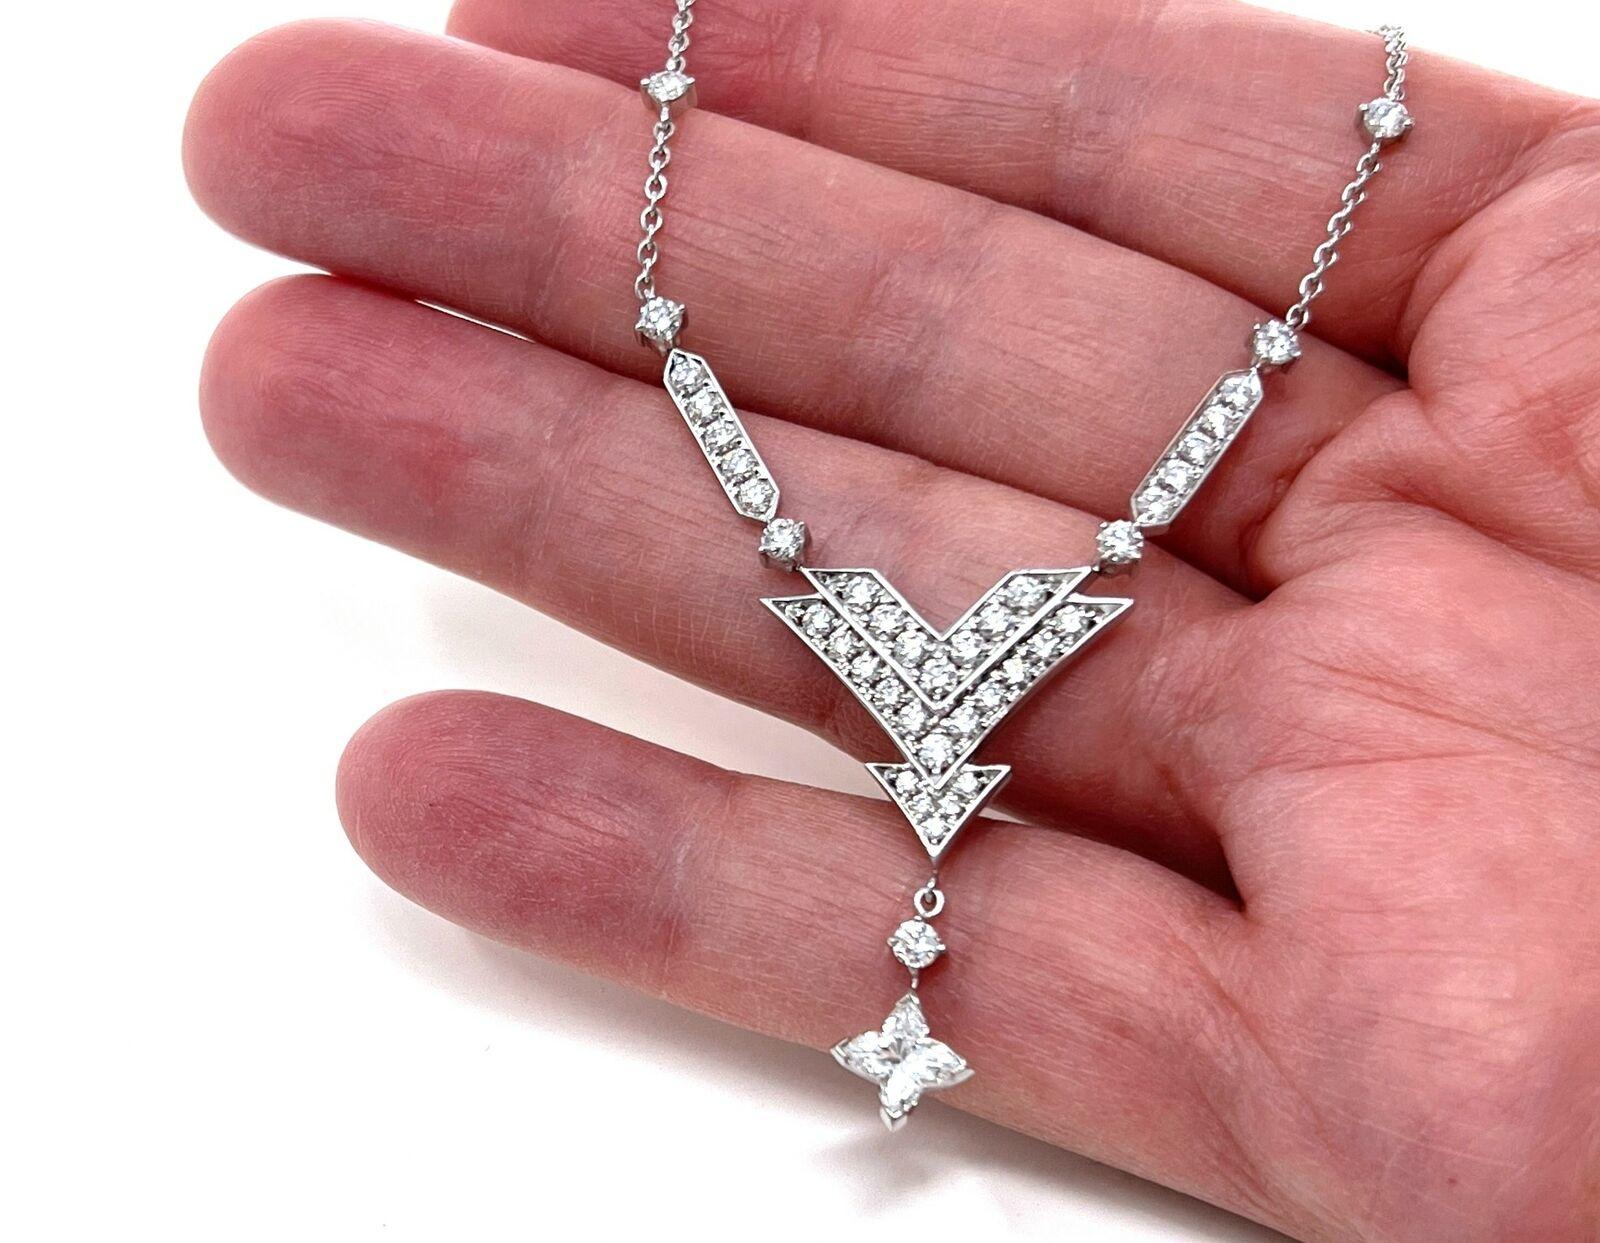 This sophisticated authentic necklace is by Louis Vuitton, it is crafted from 18k white gold with a polished finish. The pendant features a star shape diamond decorated large to small triple V frame attached to a single bar above on each end with a